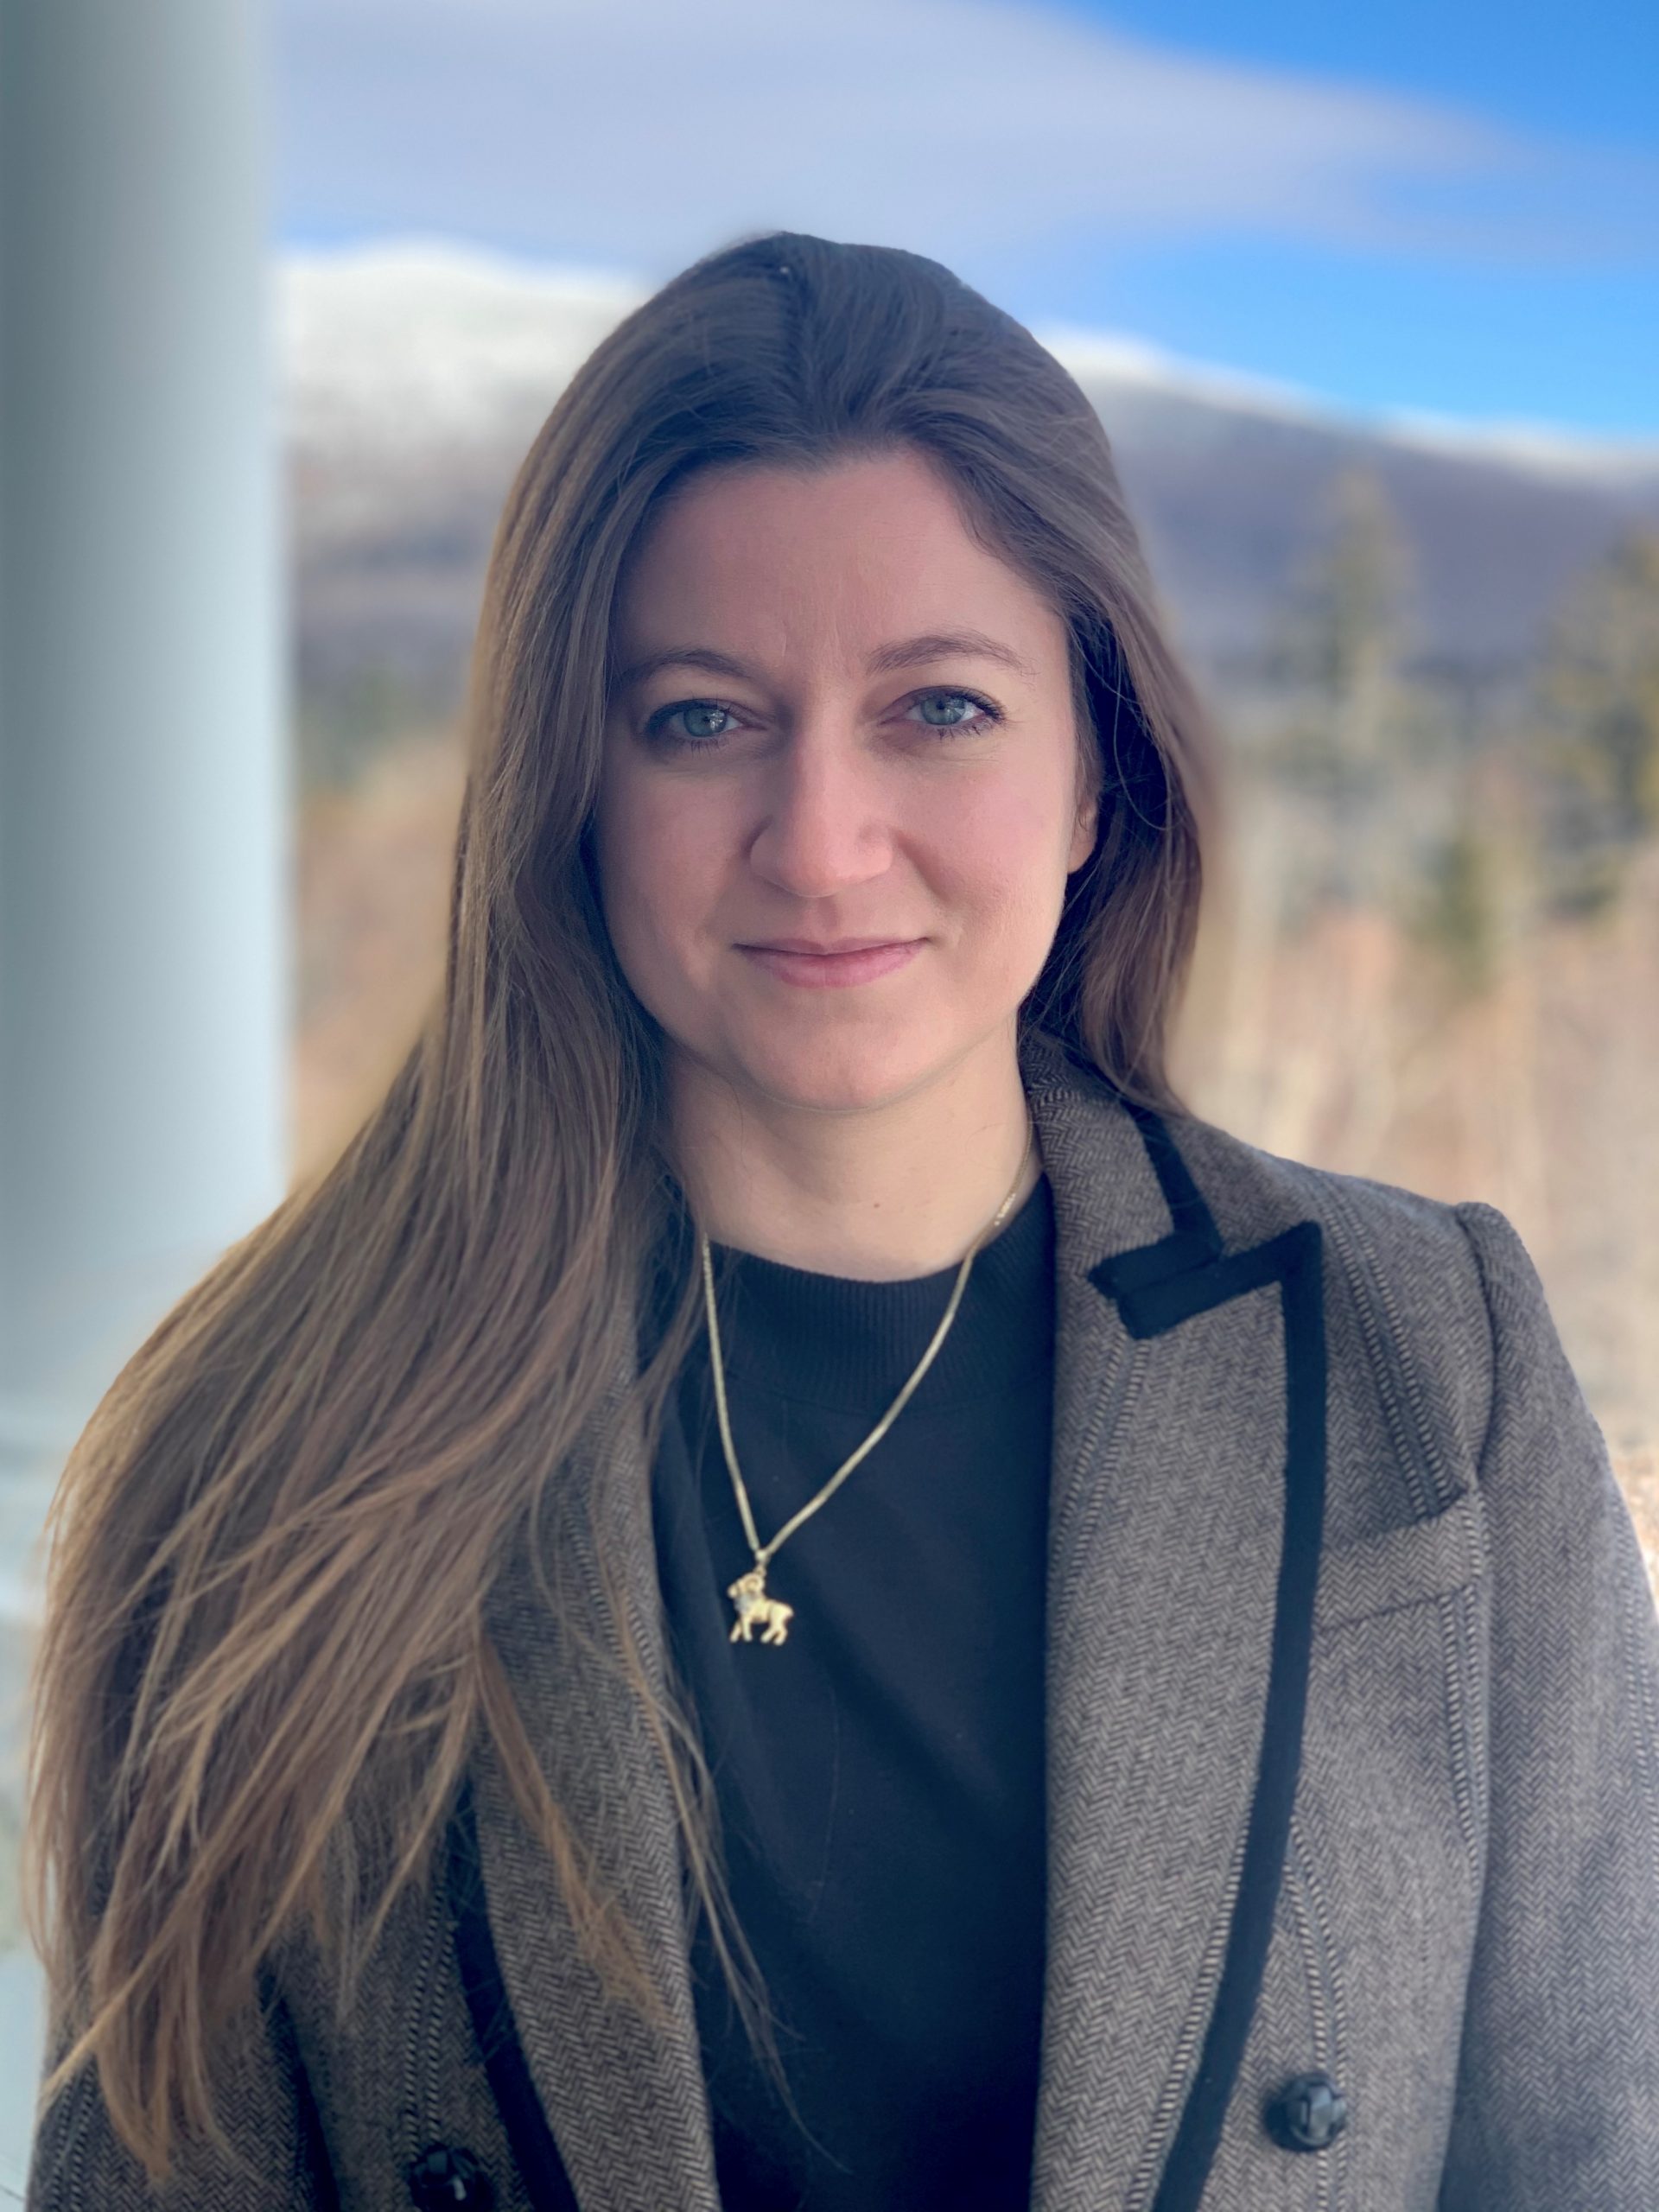 Professor Jelena Notaros named to Forbes 30 under 30 Science 2021 List